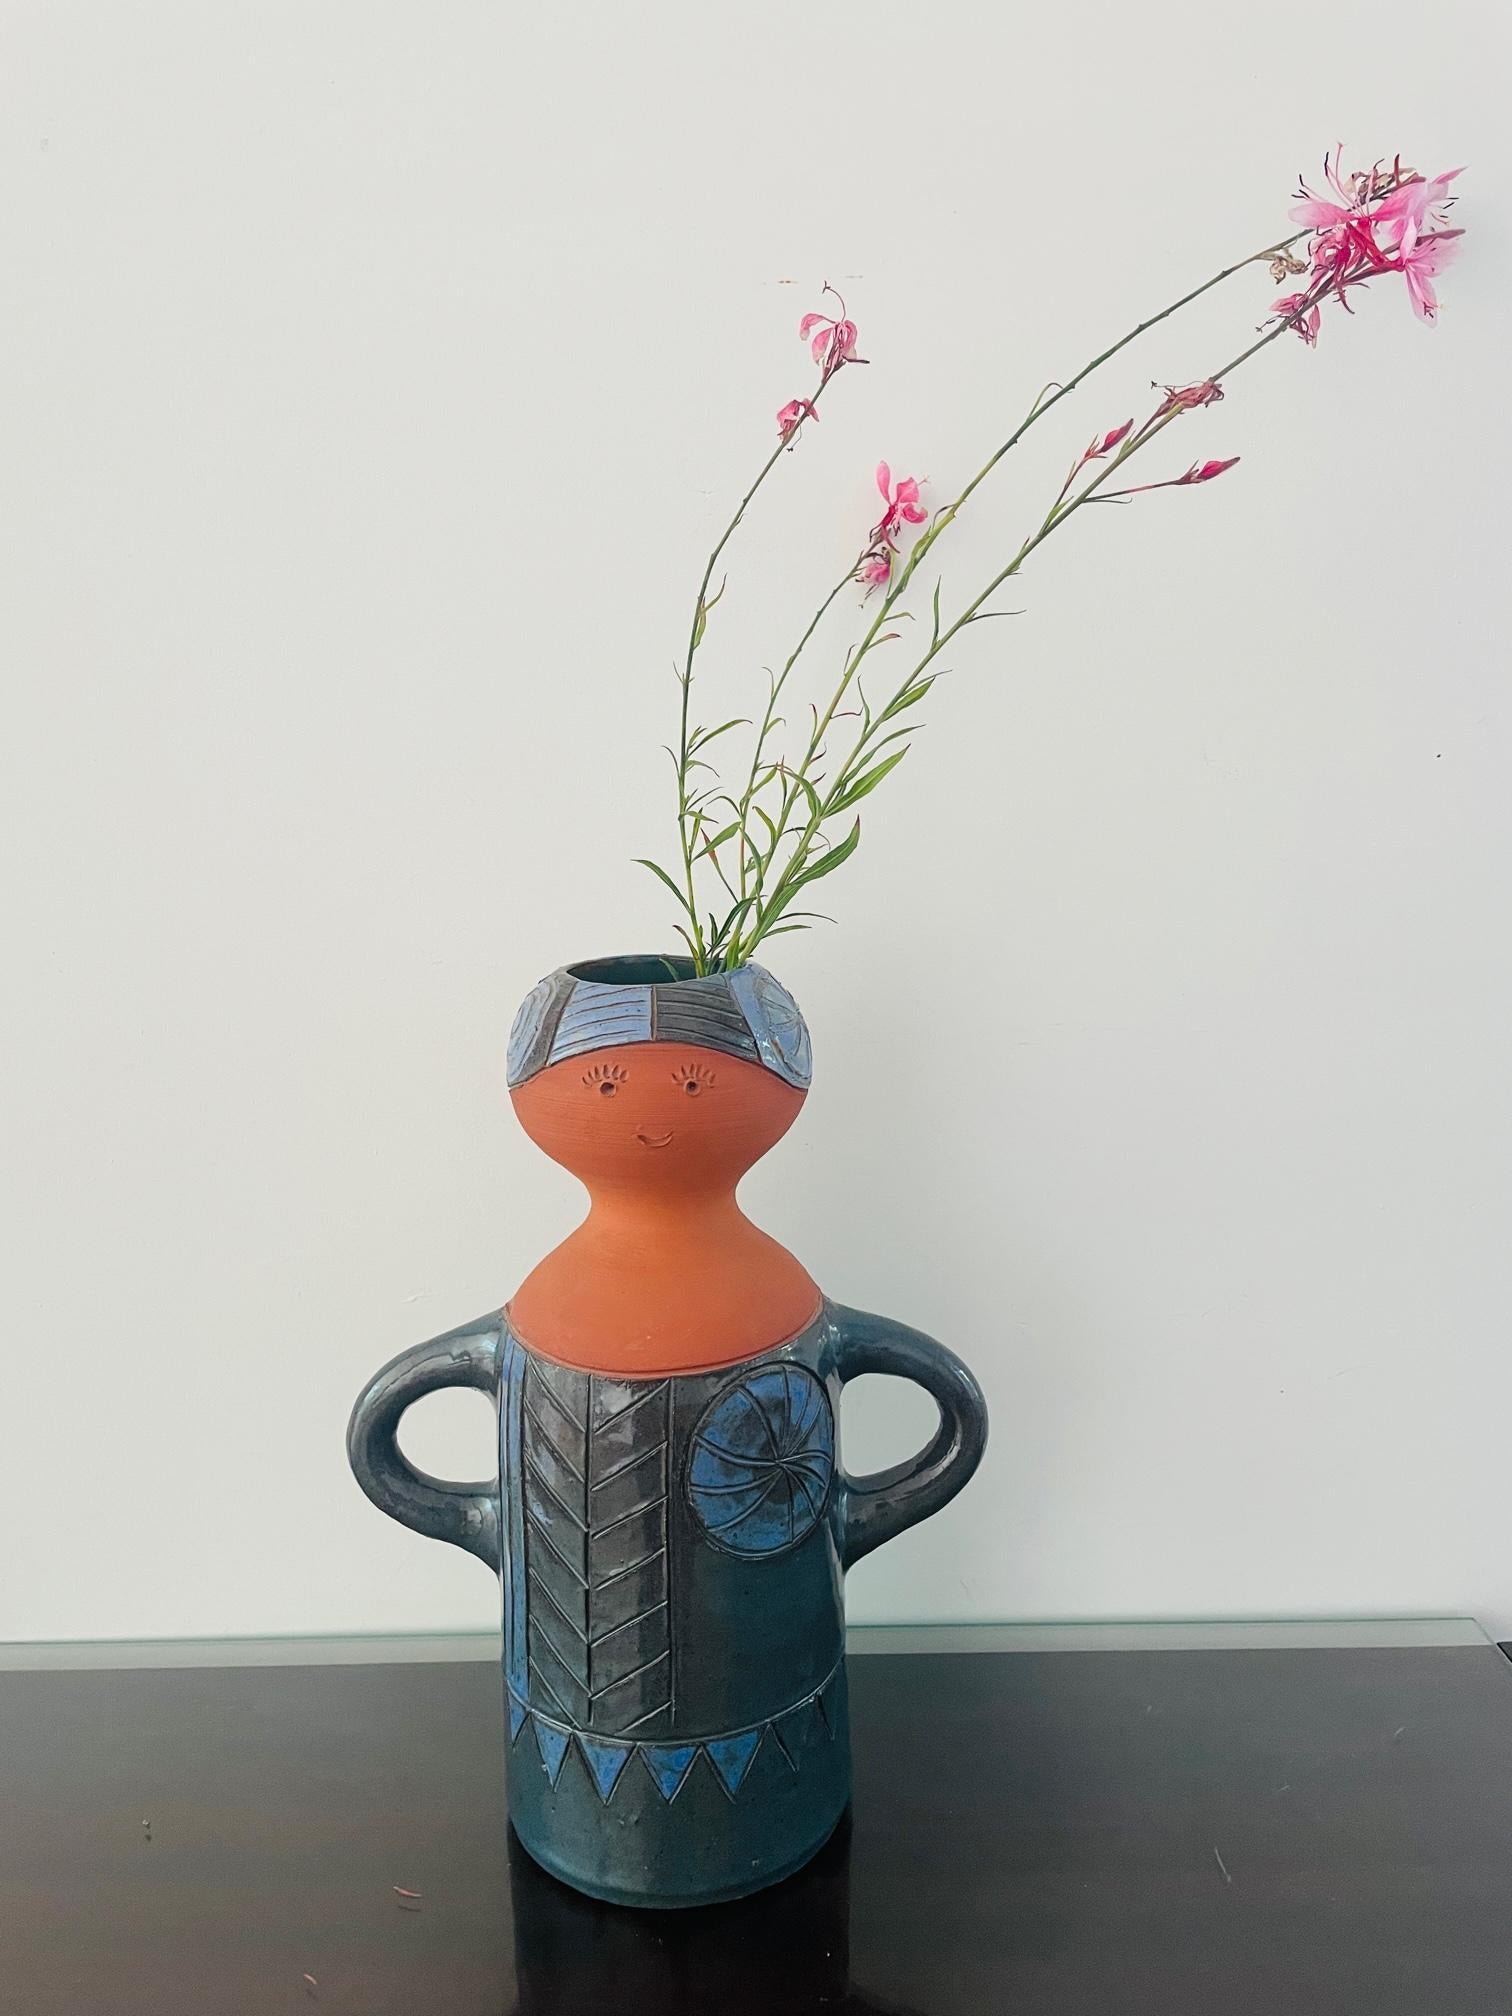 Just look at it and you know everything. This vase is a must have for collectors of any kind. From ceramic lovers to Swedish design freaks. Adorable and beautiful!